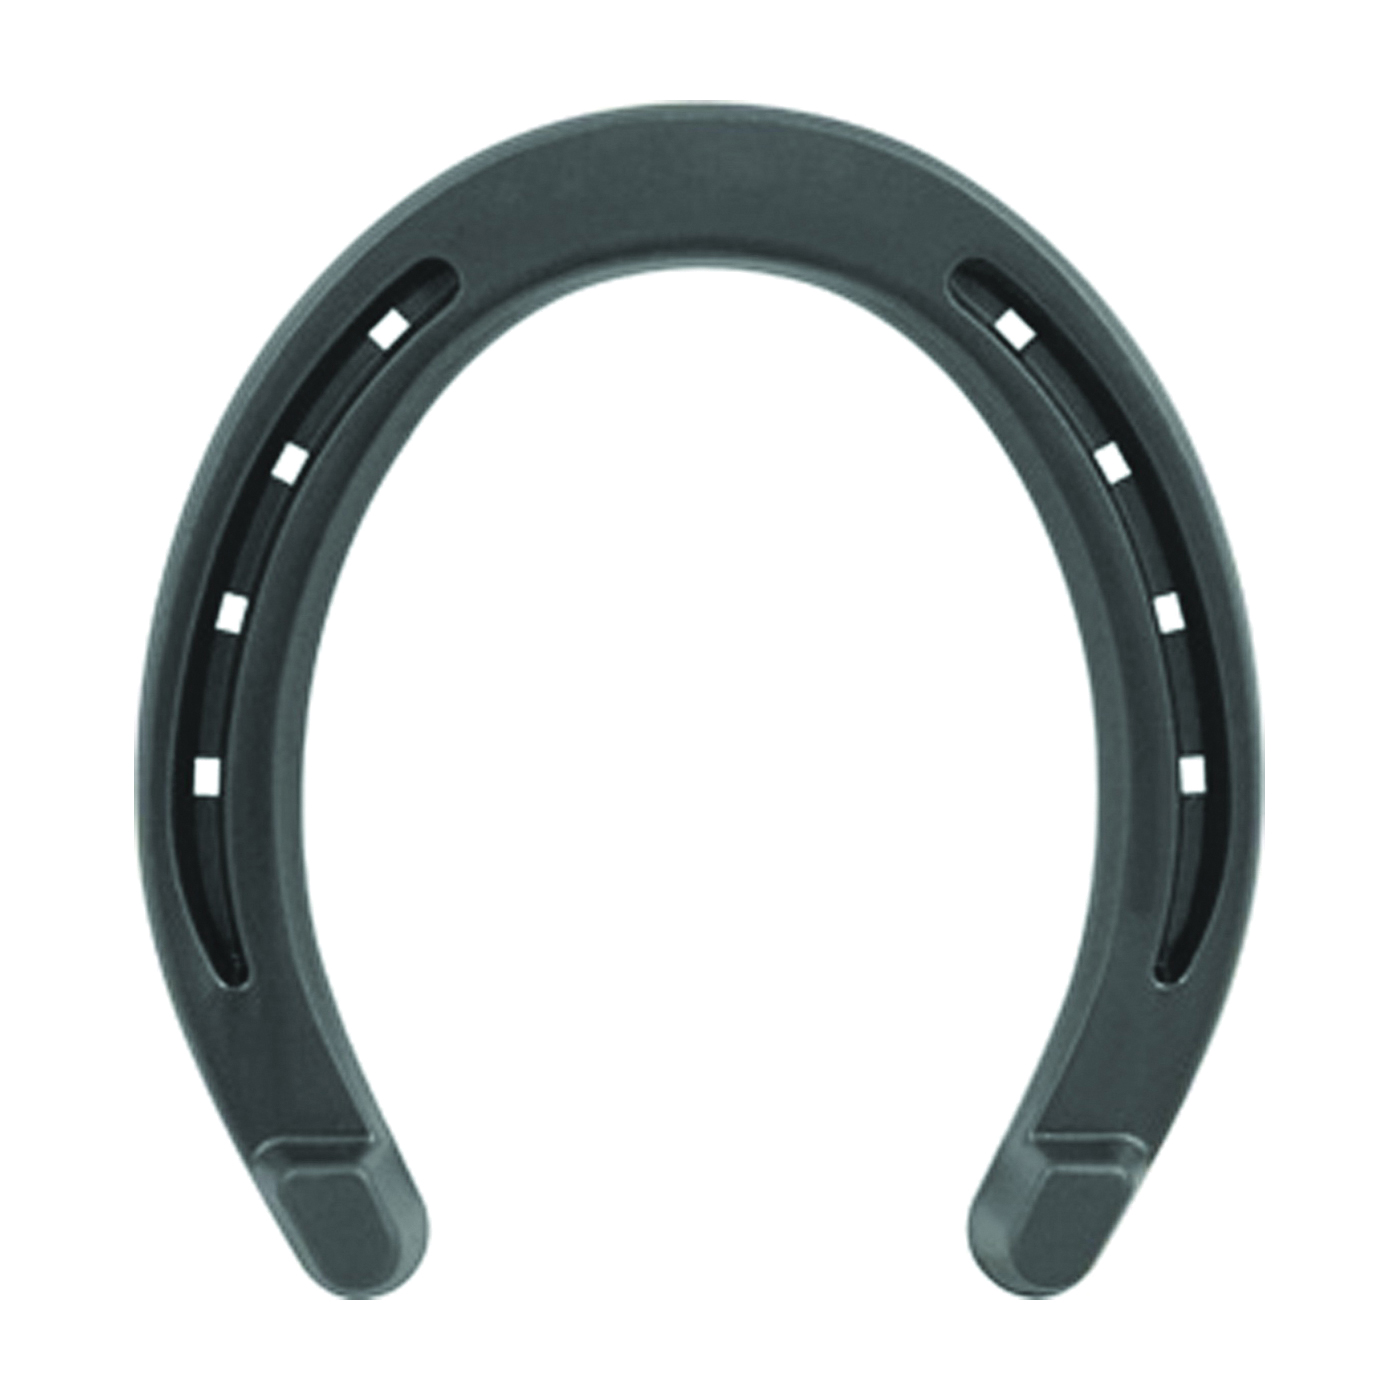 Farrier DC0HB Horseshoe, 1/4 in Thick, #0, Steel